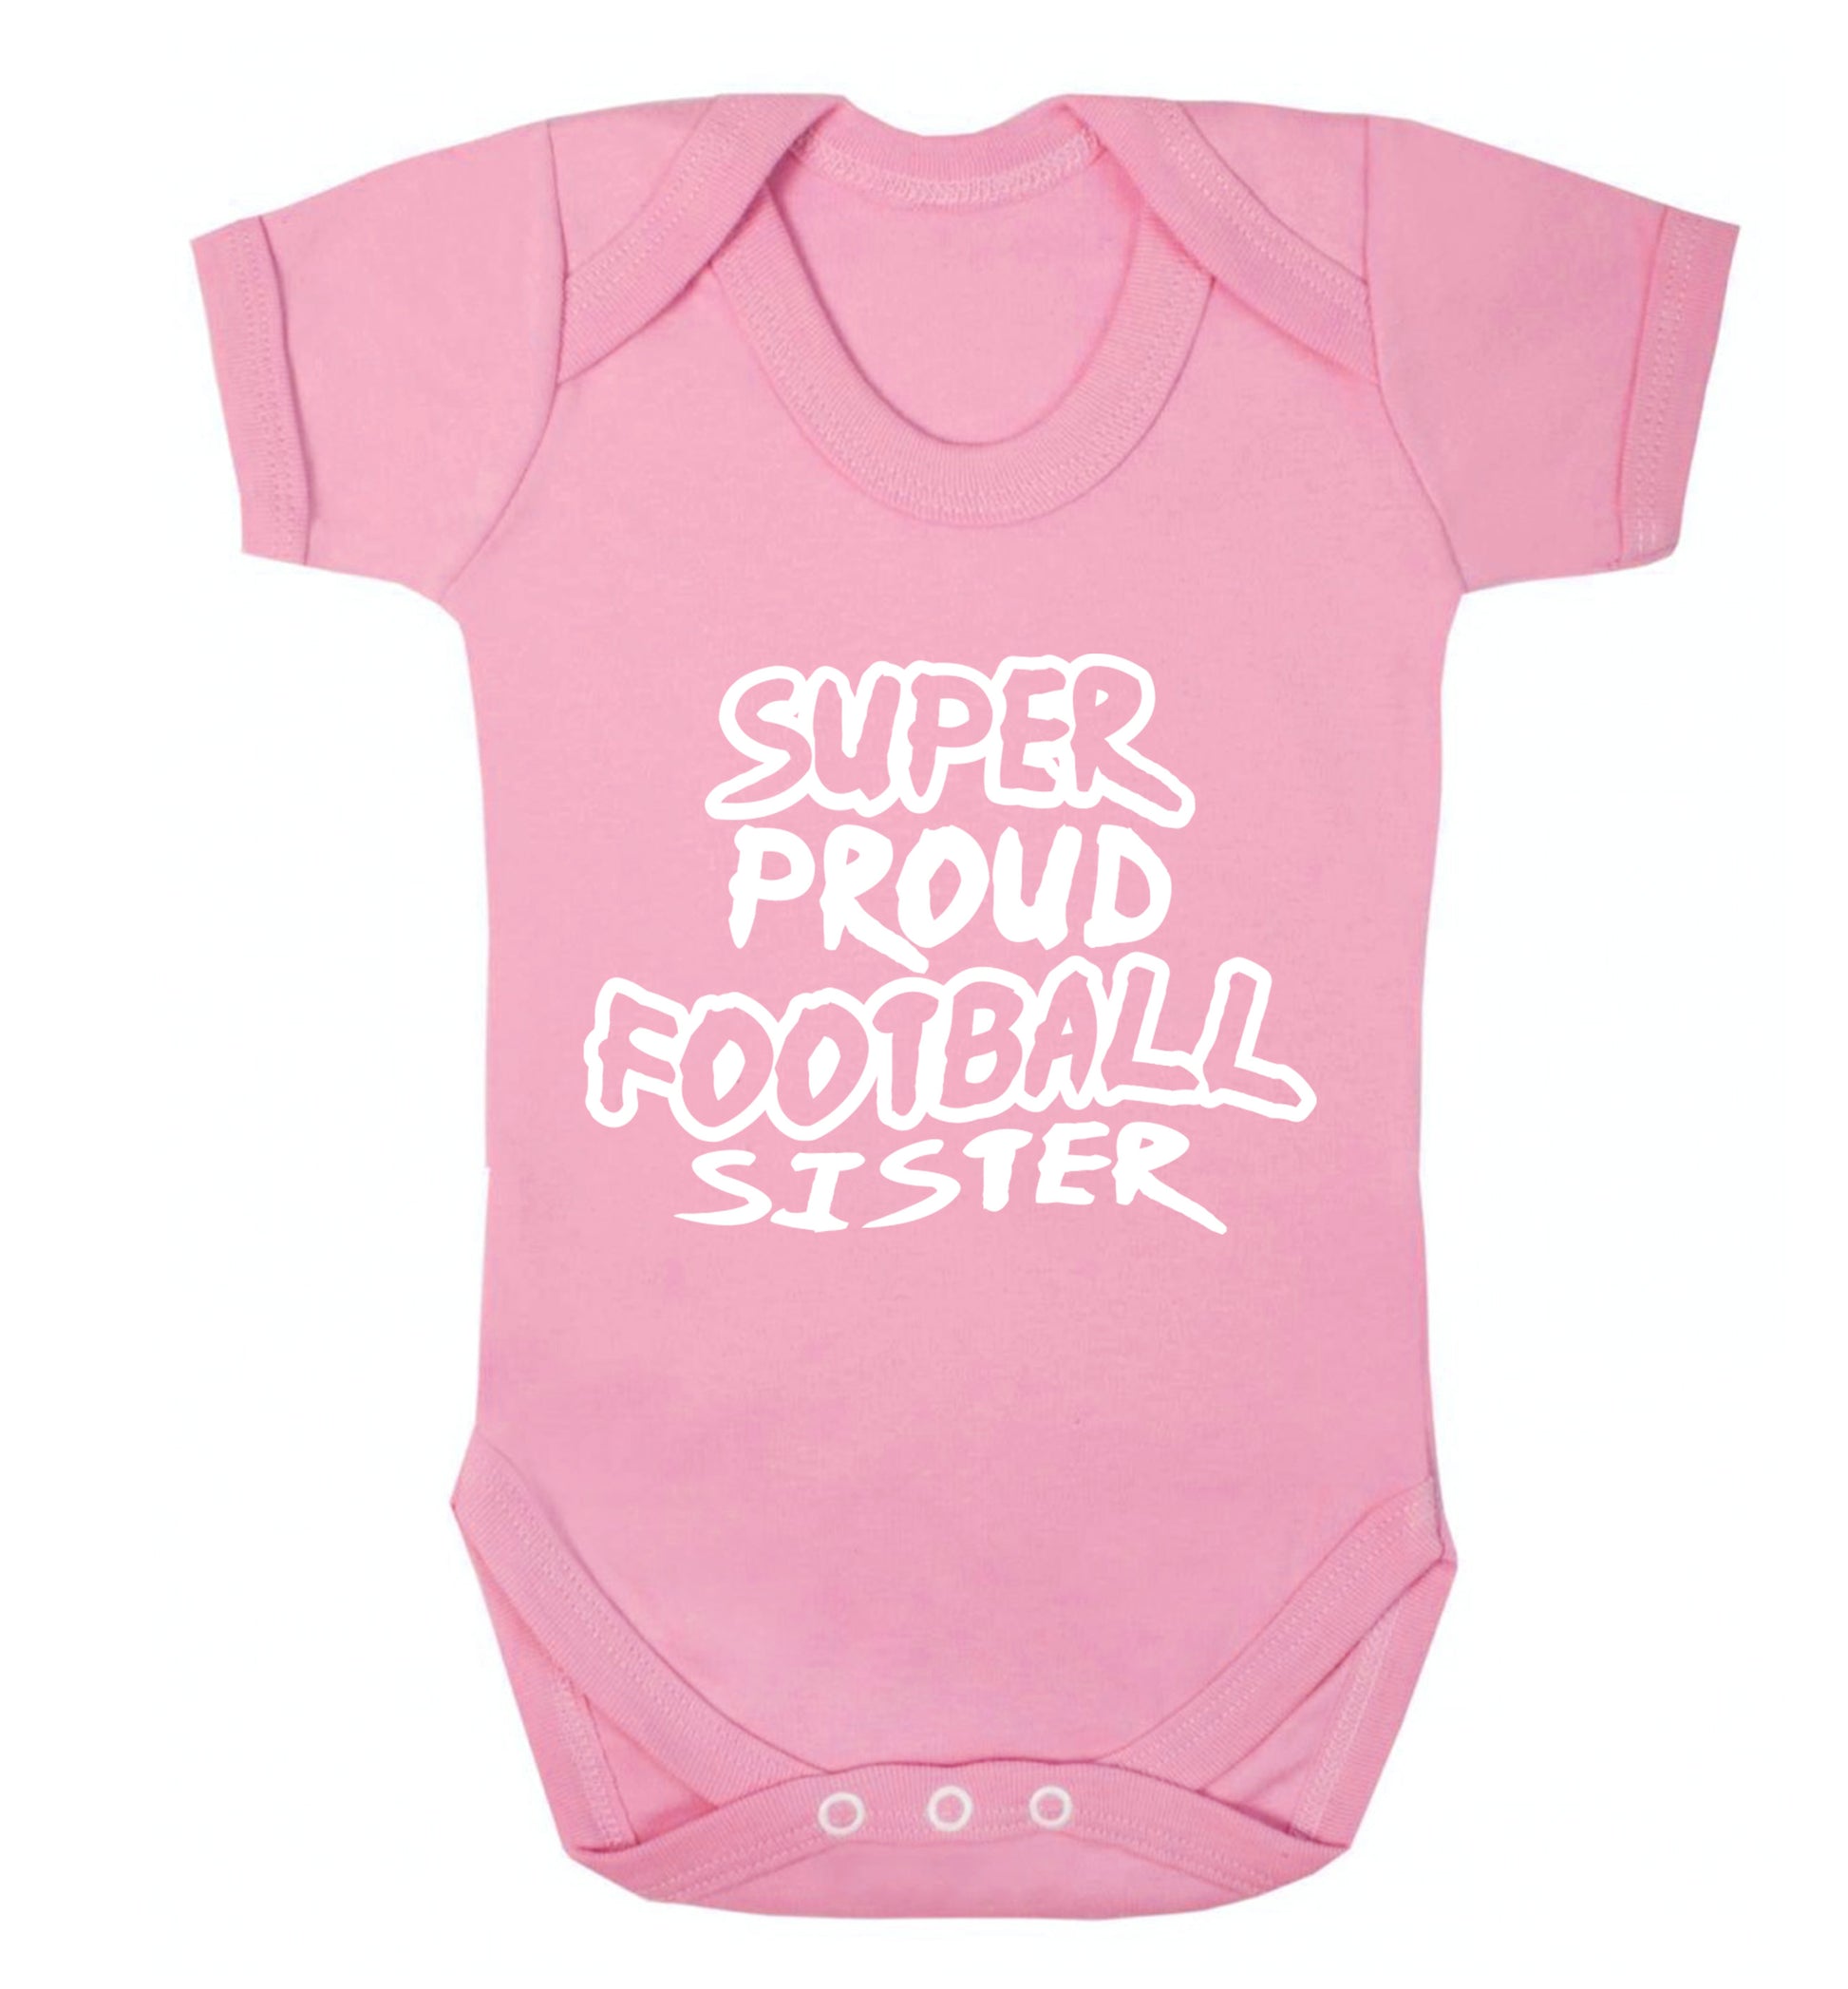 Super proud football sister Baby Vest pale pink 18-24 months